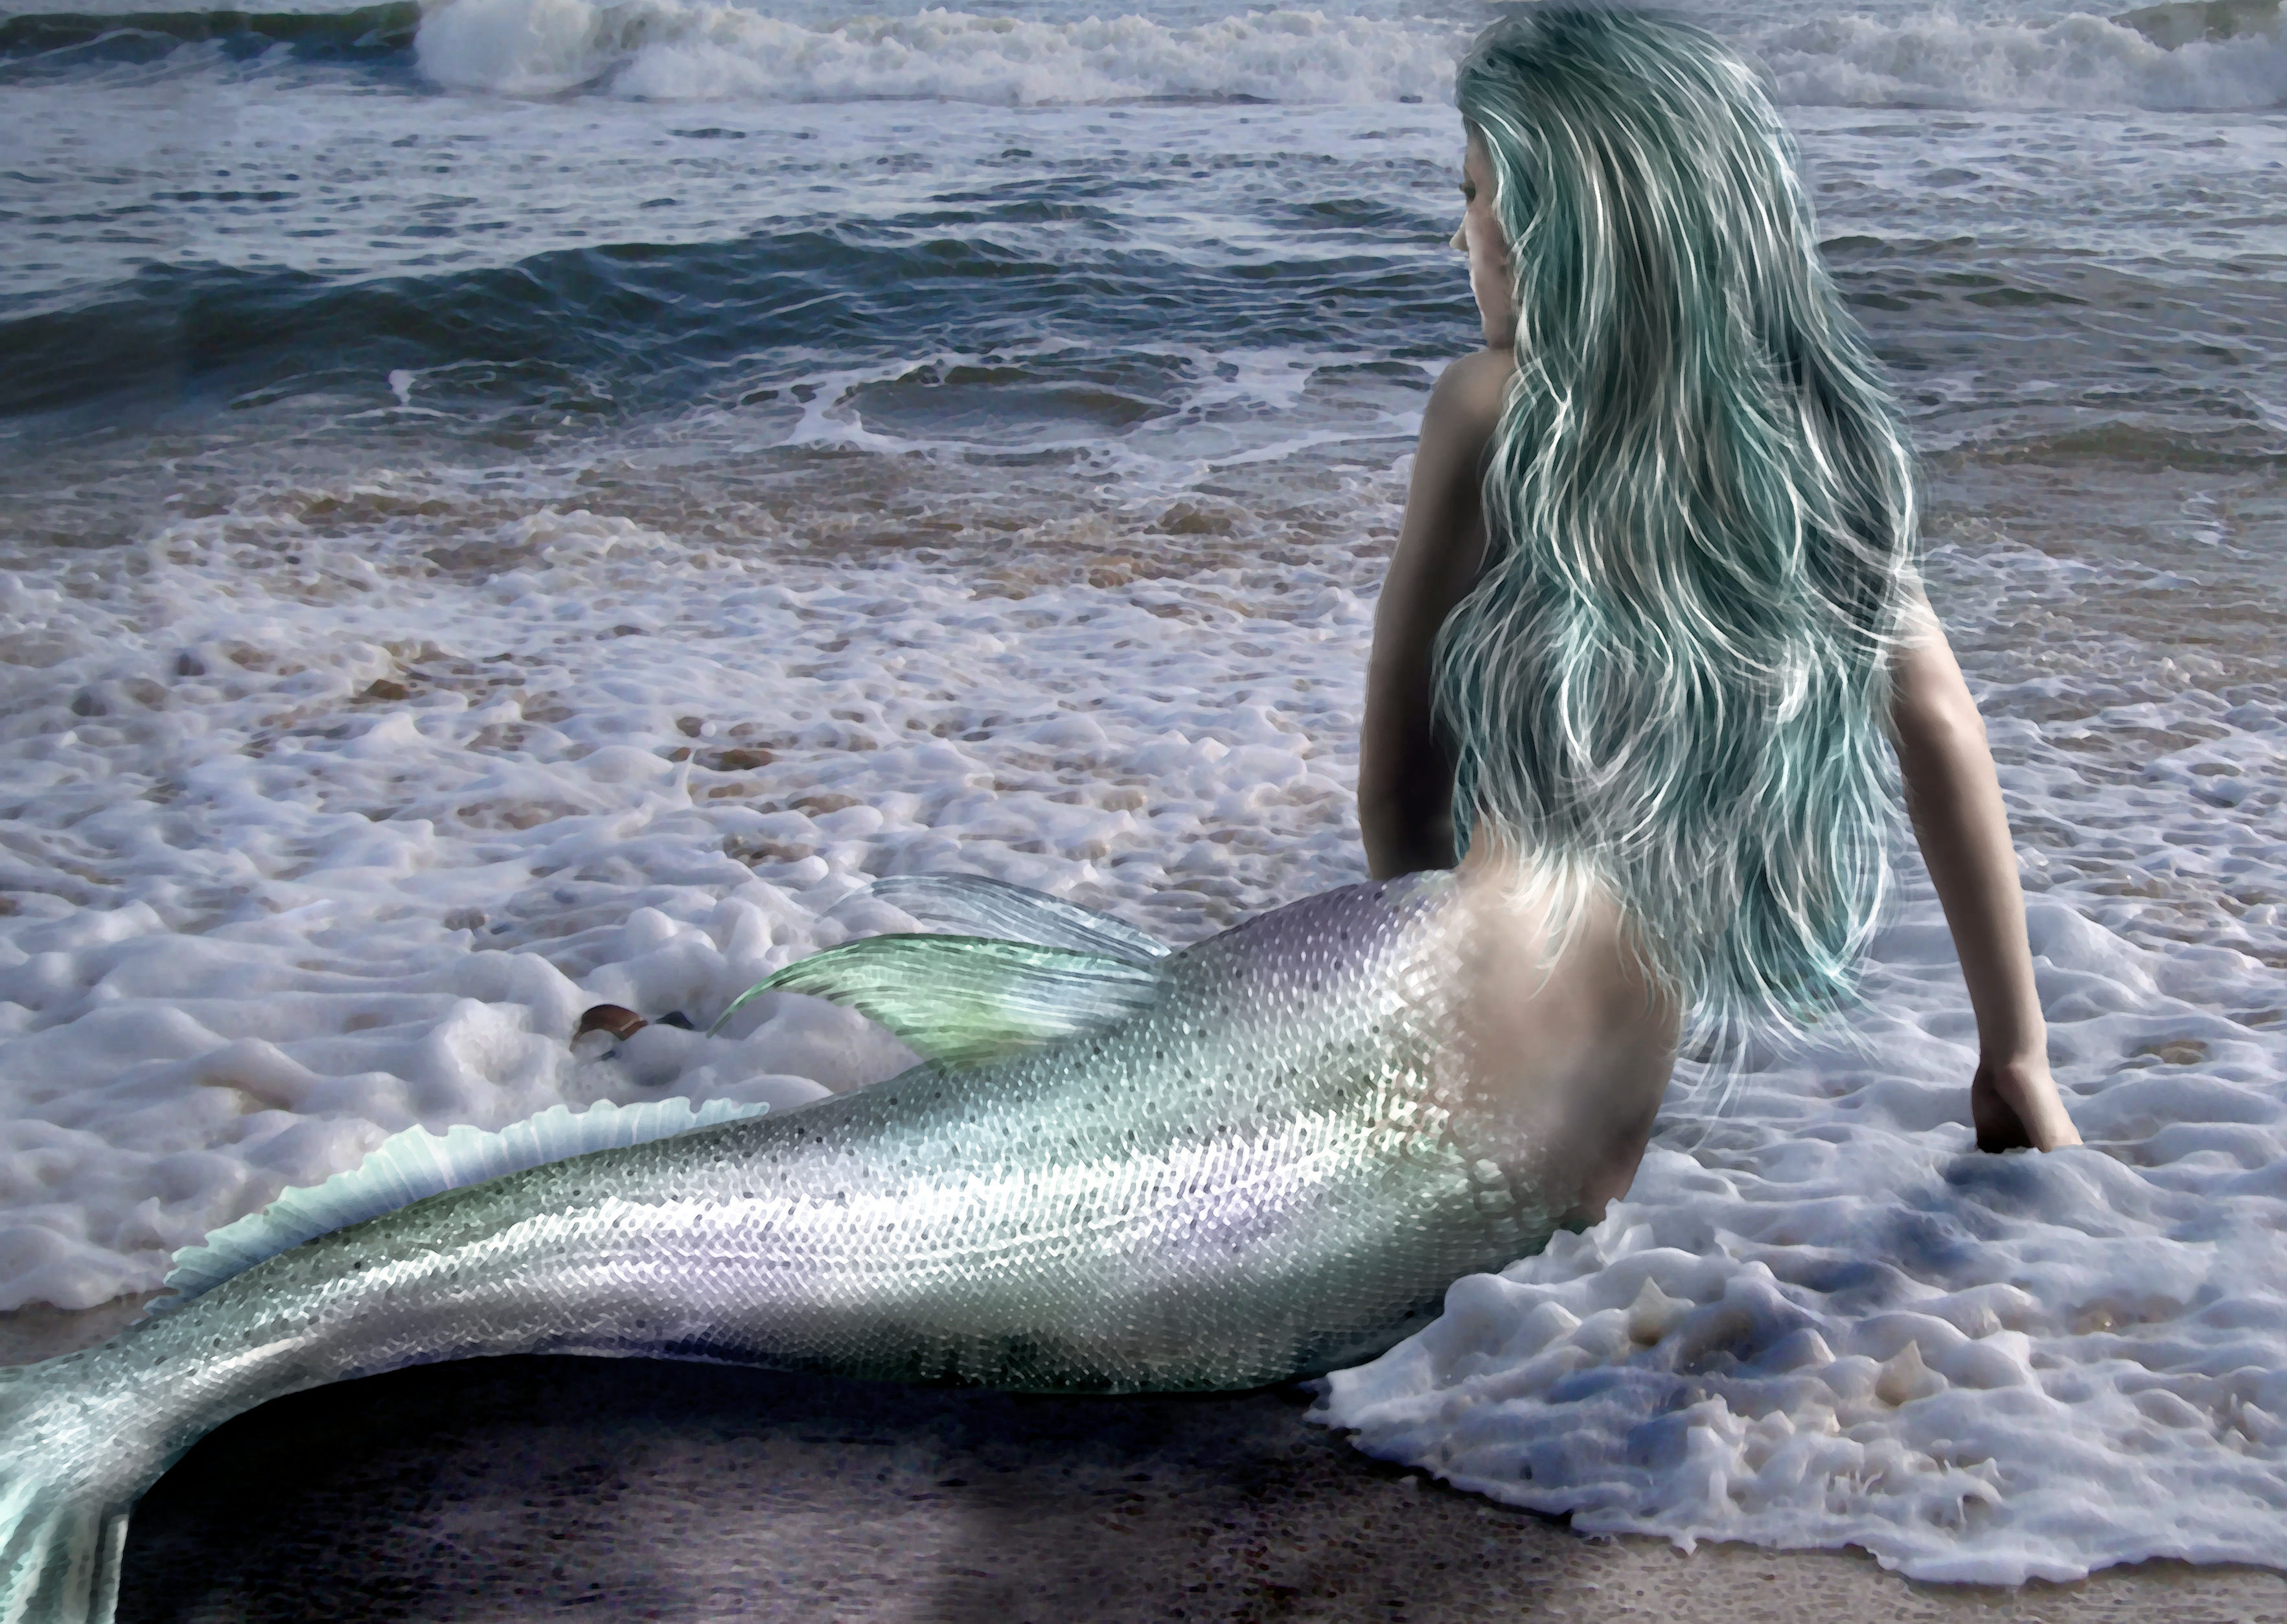 Tail picture mermaid Mermaid Tails